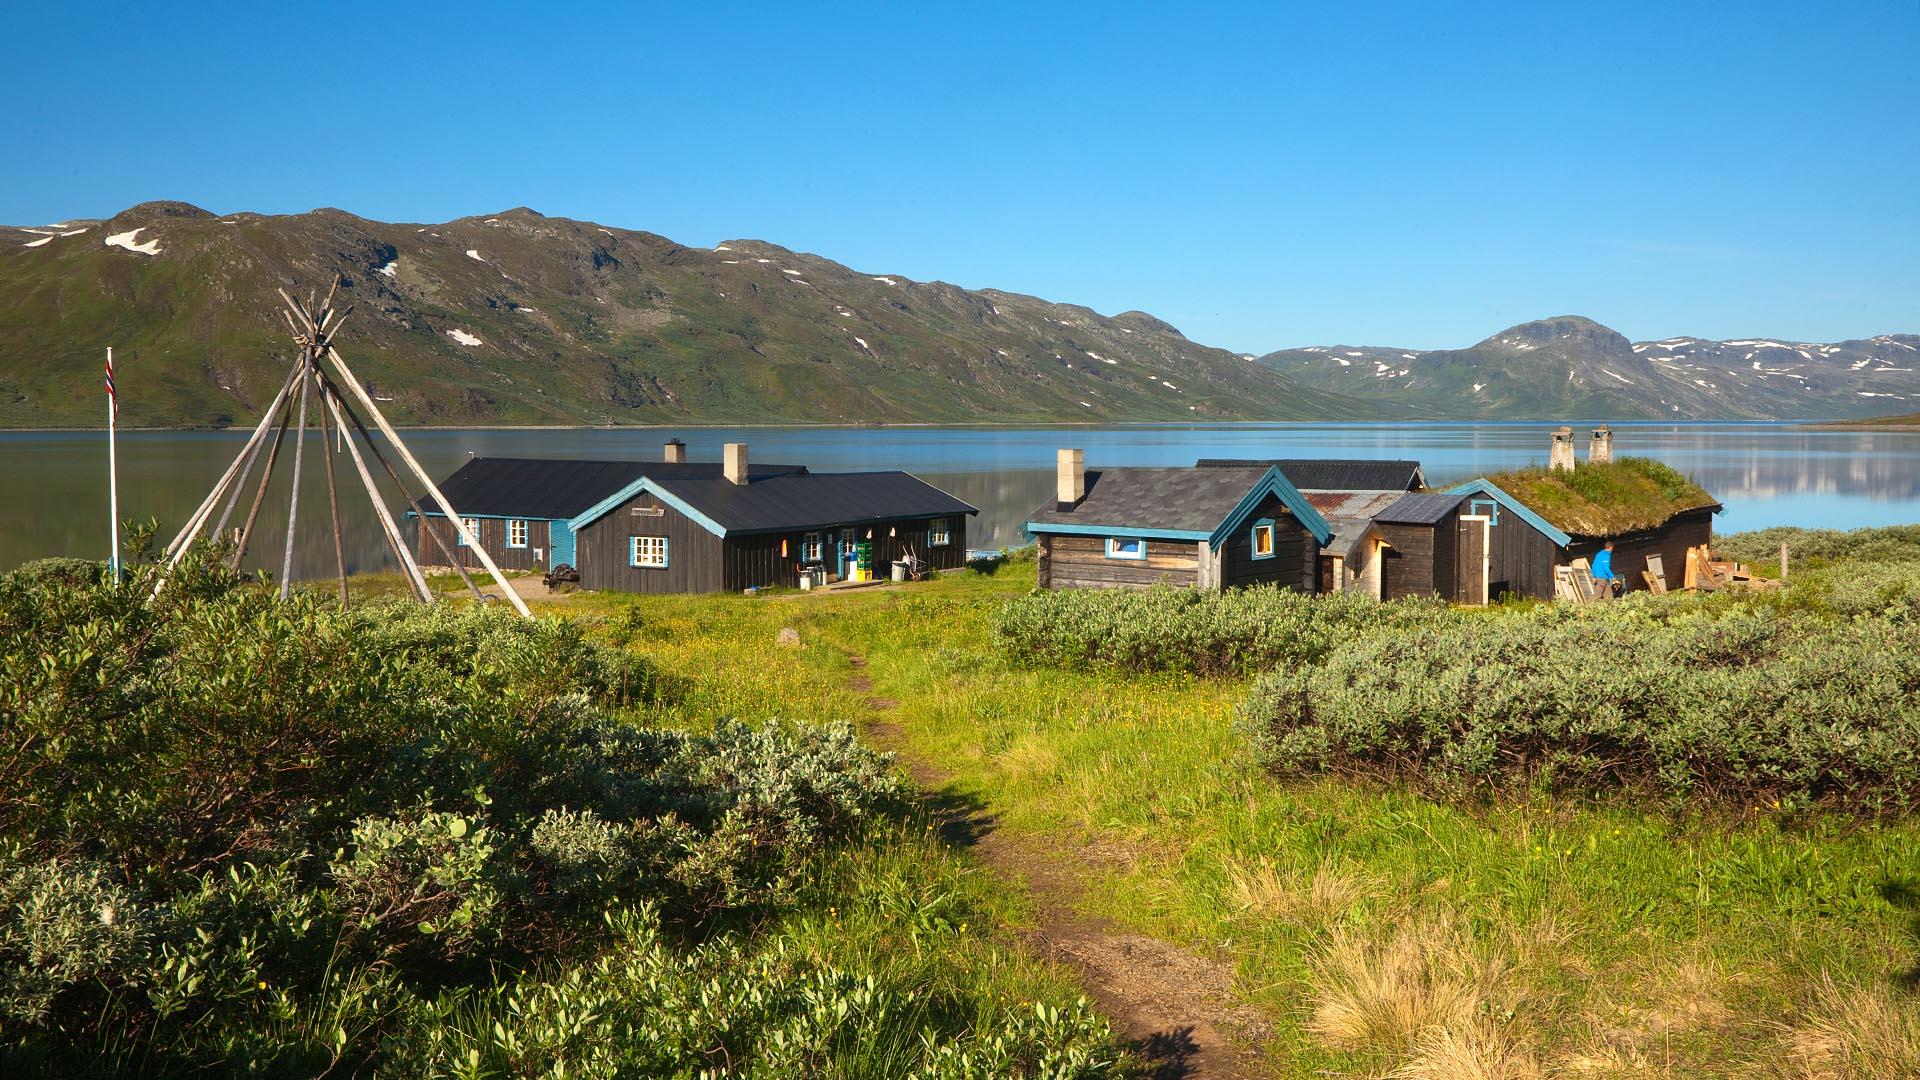 A grassy trail leads through juniper bushes to a compund of cabins on the shore of a large mountain lake.